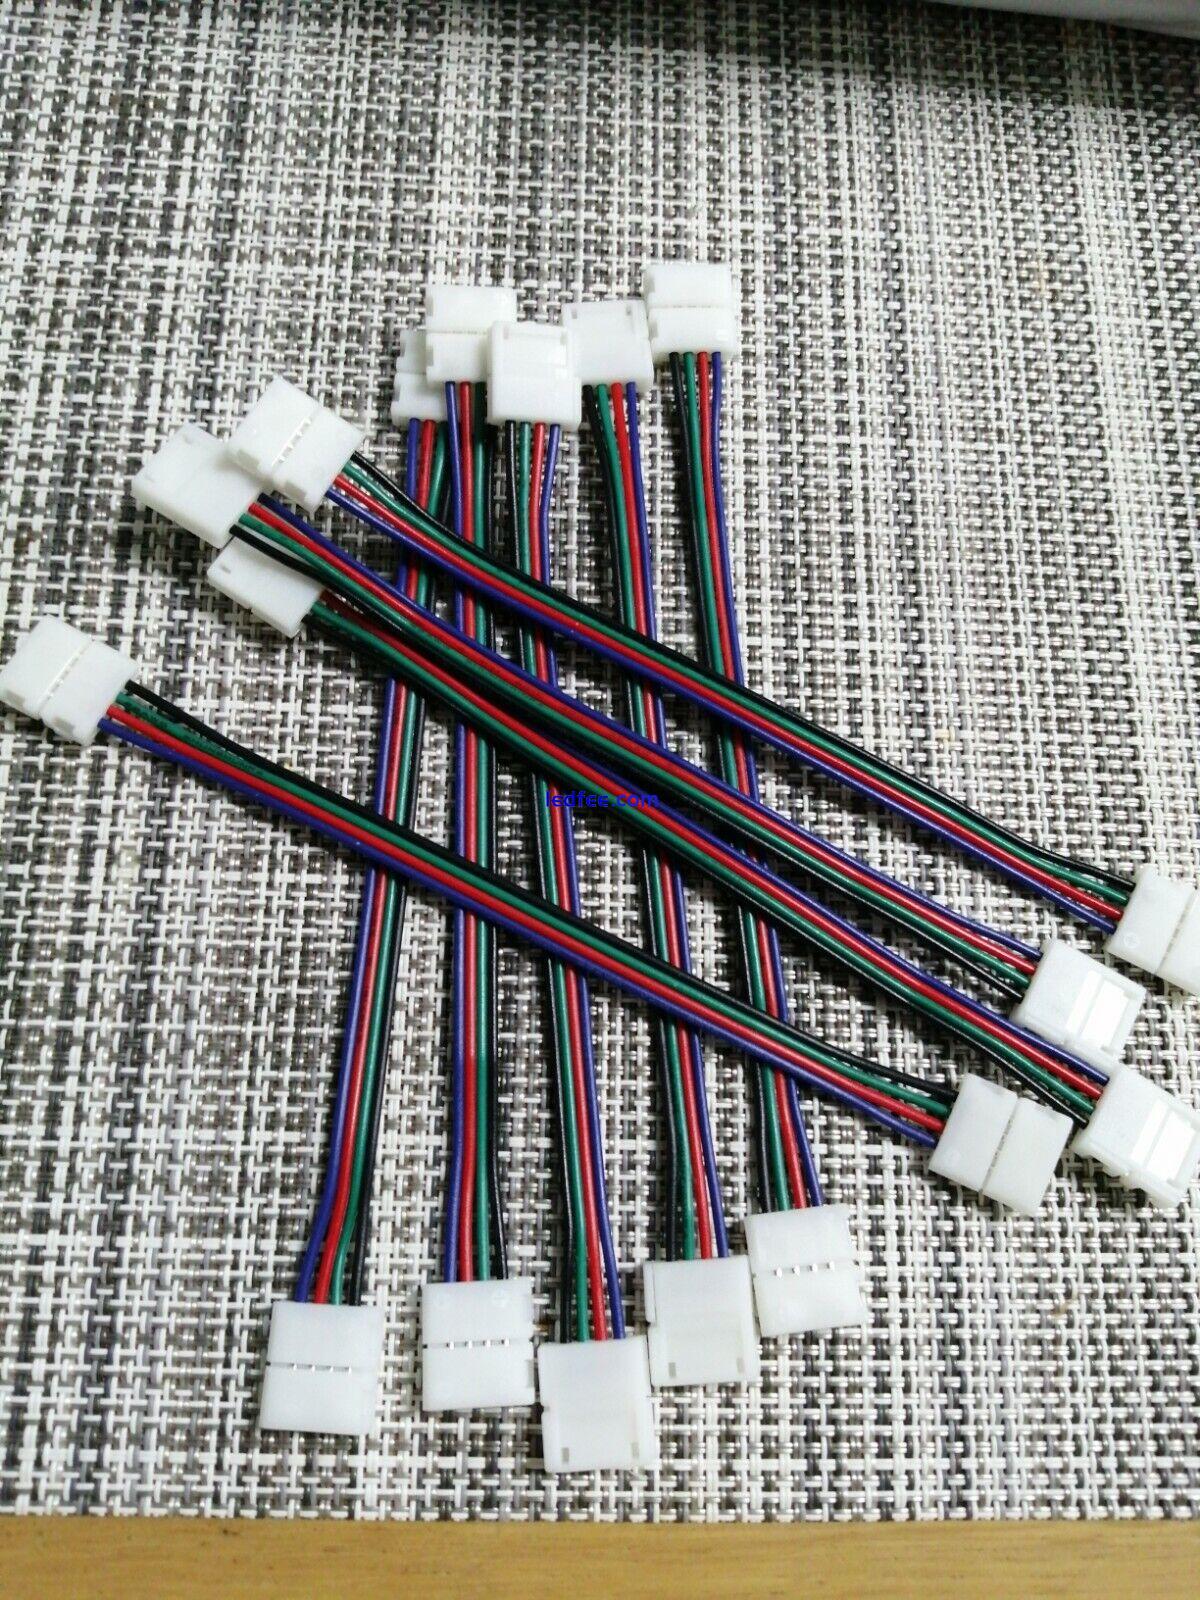 10 pcs RGB PCB 4 PIN LED Strip Light Connector 10MM Wide Joiner Adapter Cable 0 